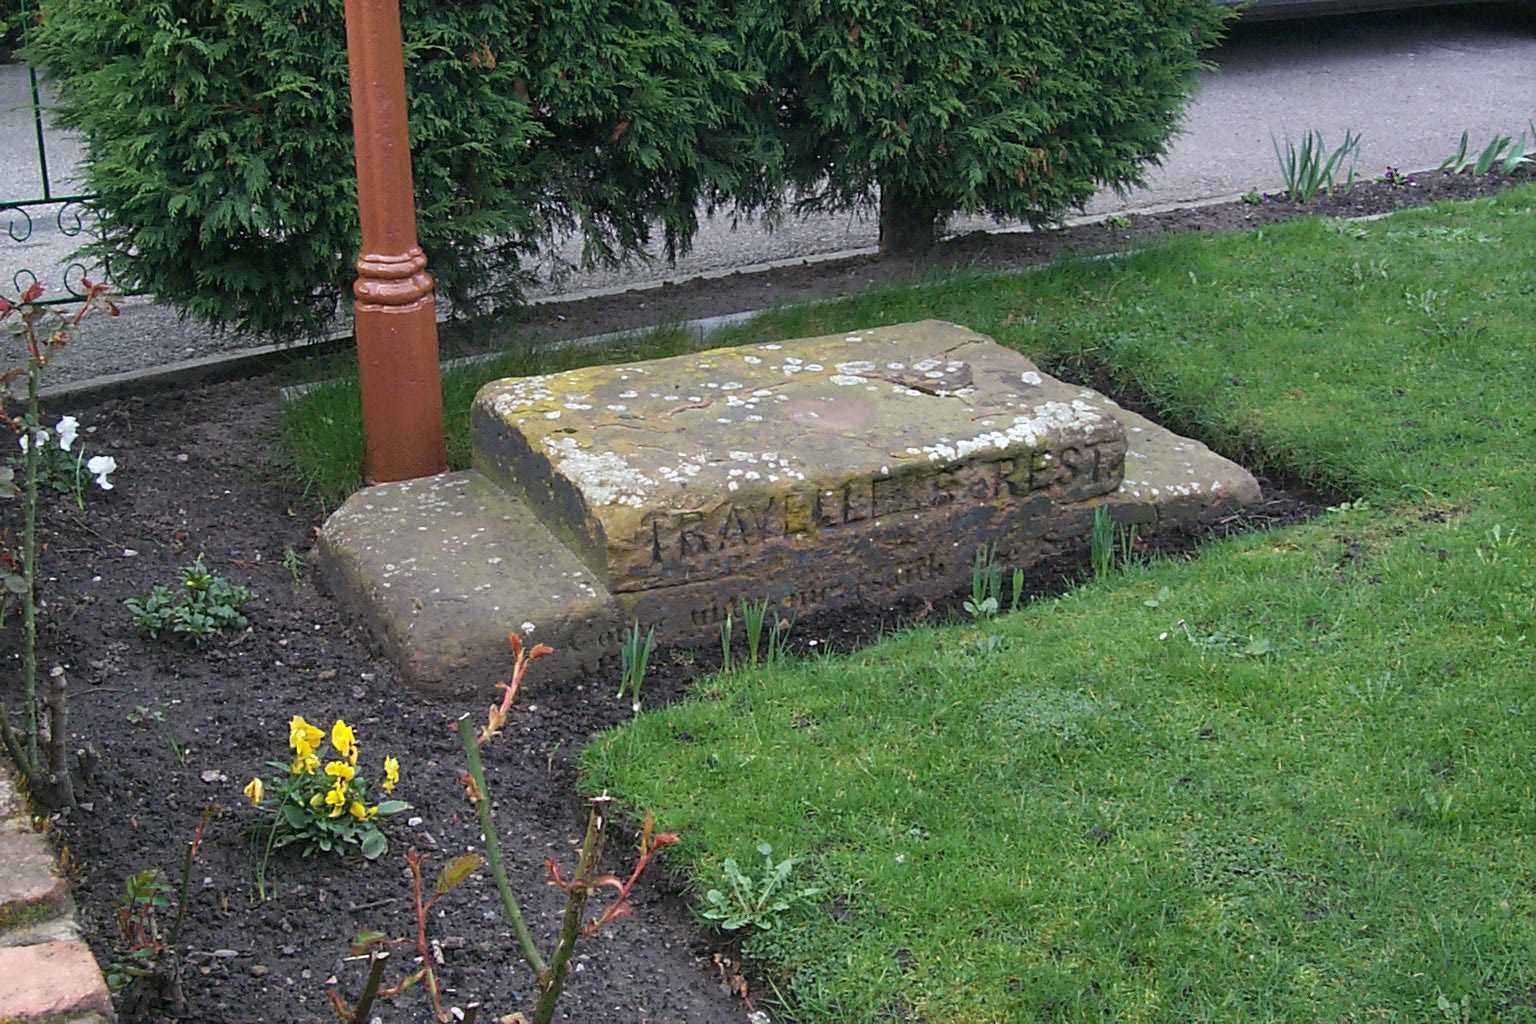 Stone block inscribed TRAVELLERS REST